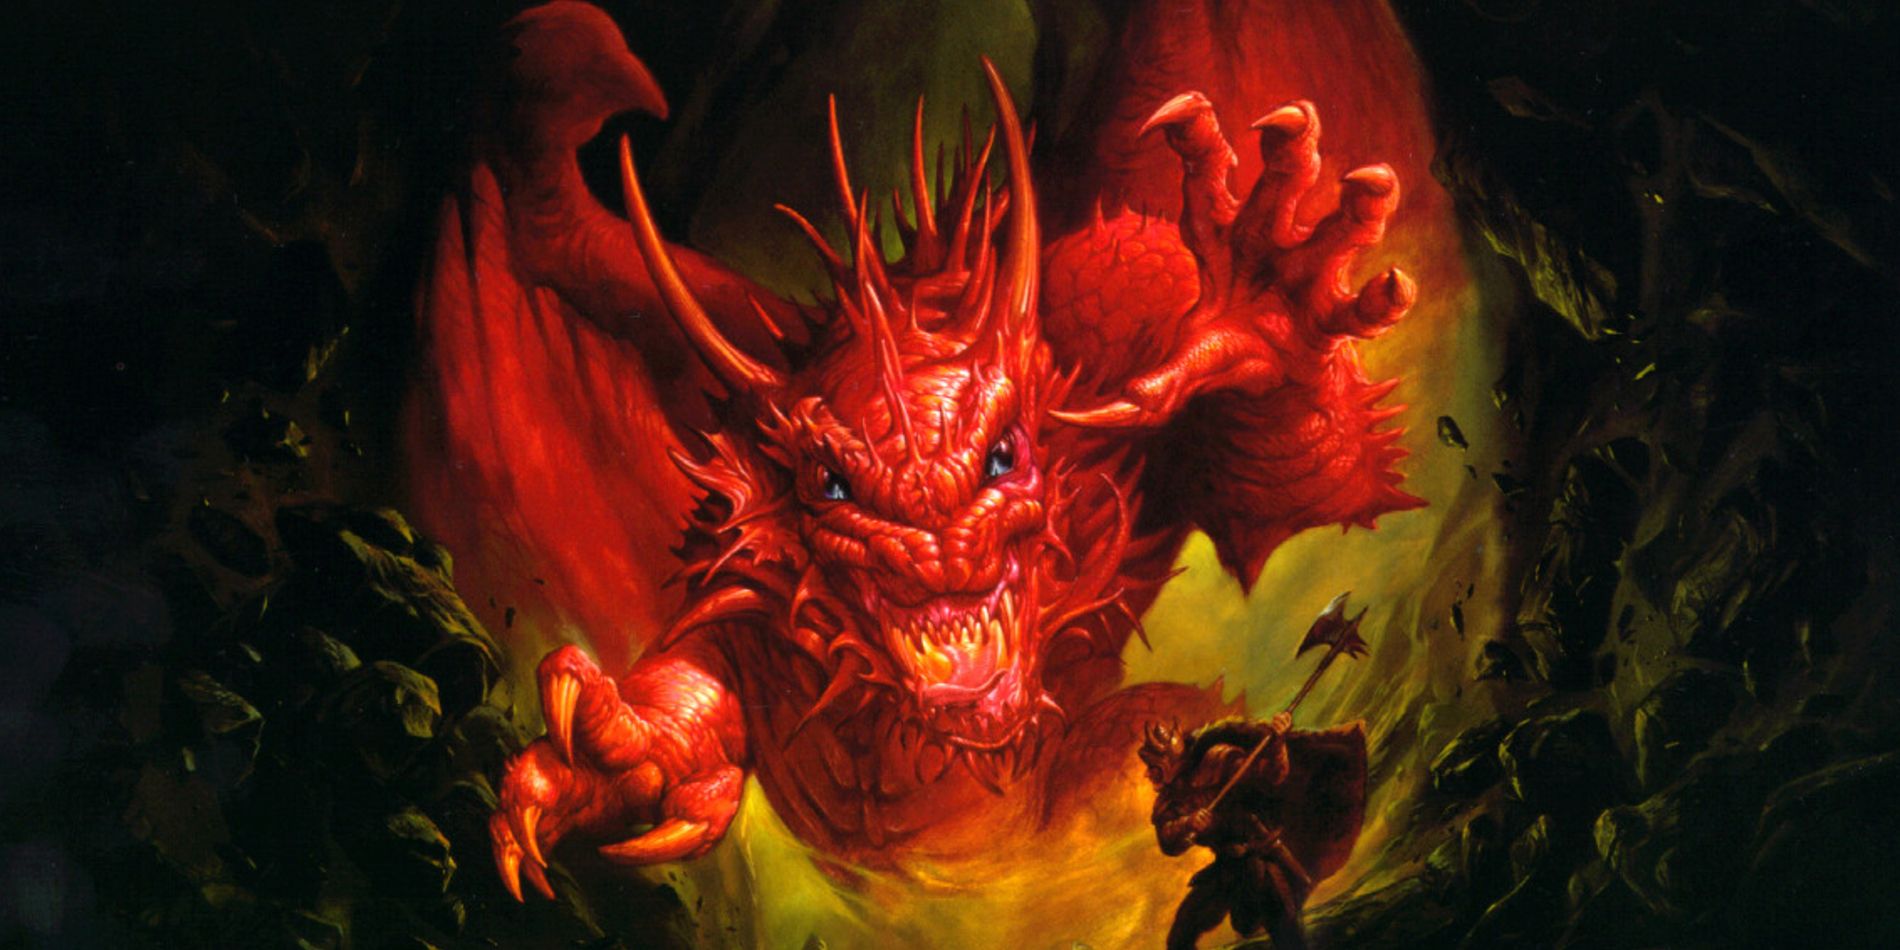 15 Controversies That Almost Destroyed Dungeons & Dragons